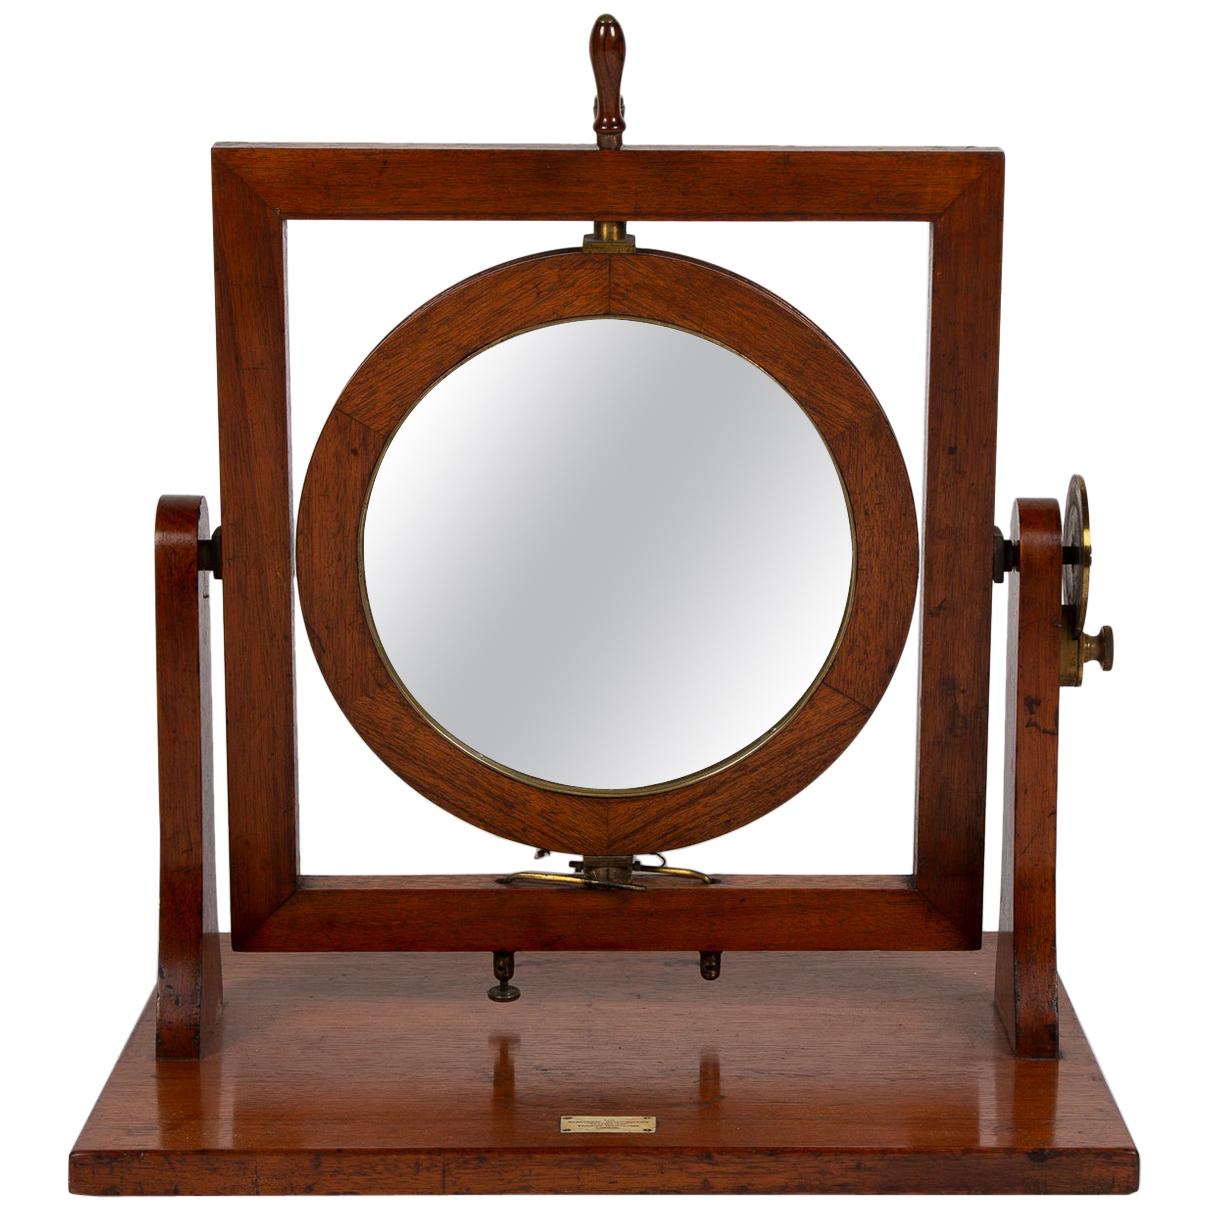 Delzenne's Circle by Elliott Brothers of London, with Mirror, circa 1910